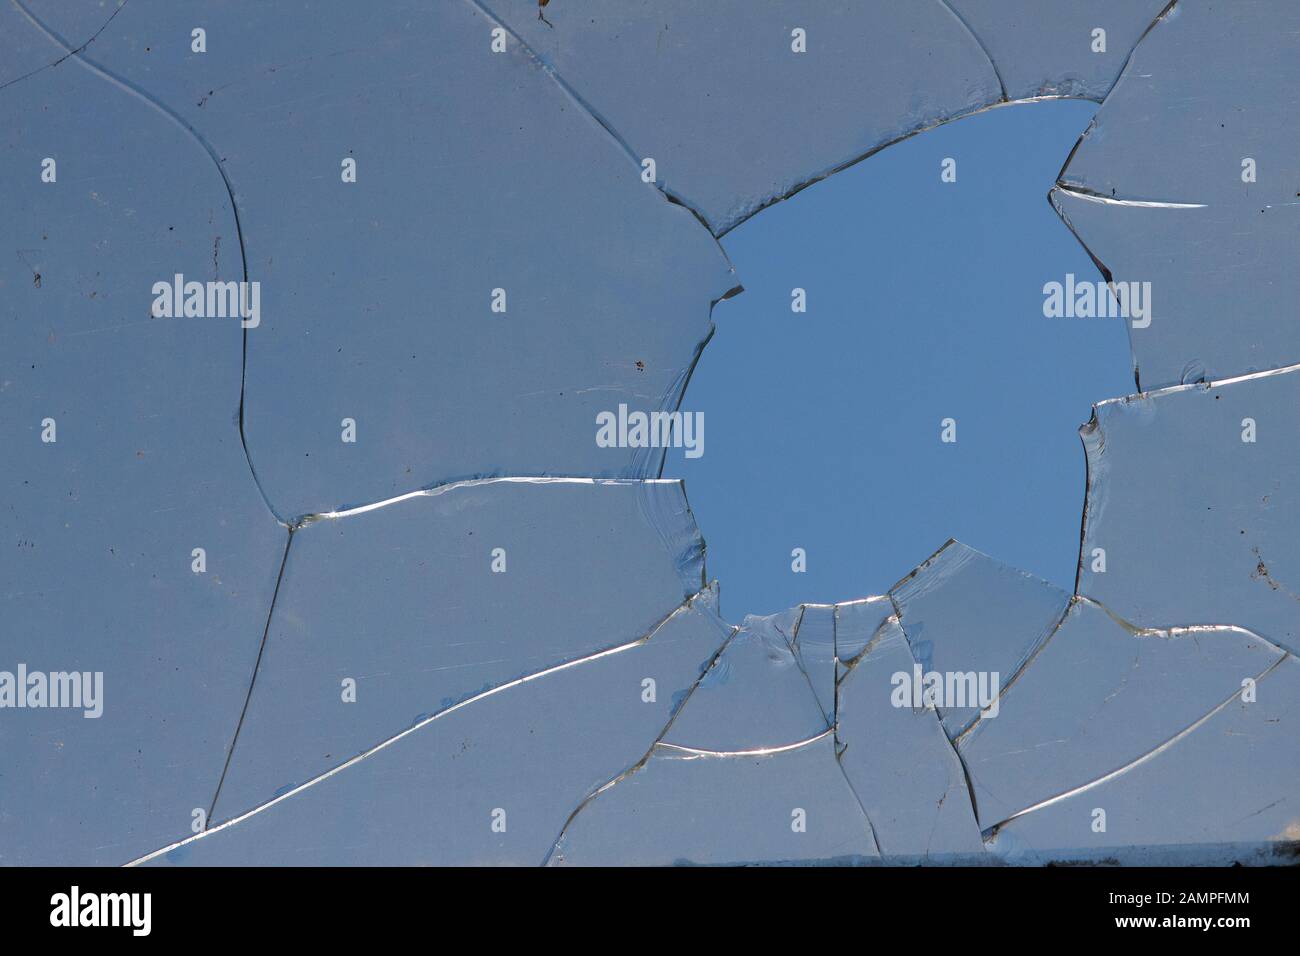 Dirty cracked glass background texture. Stock Photo